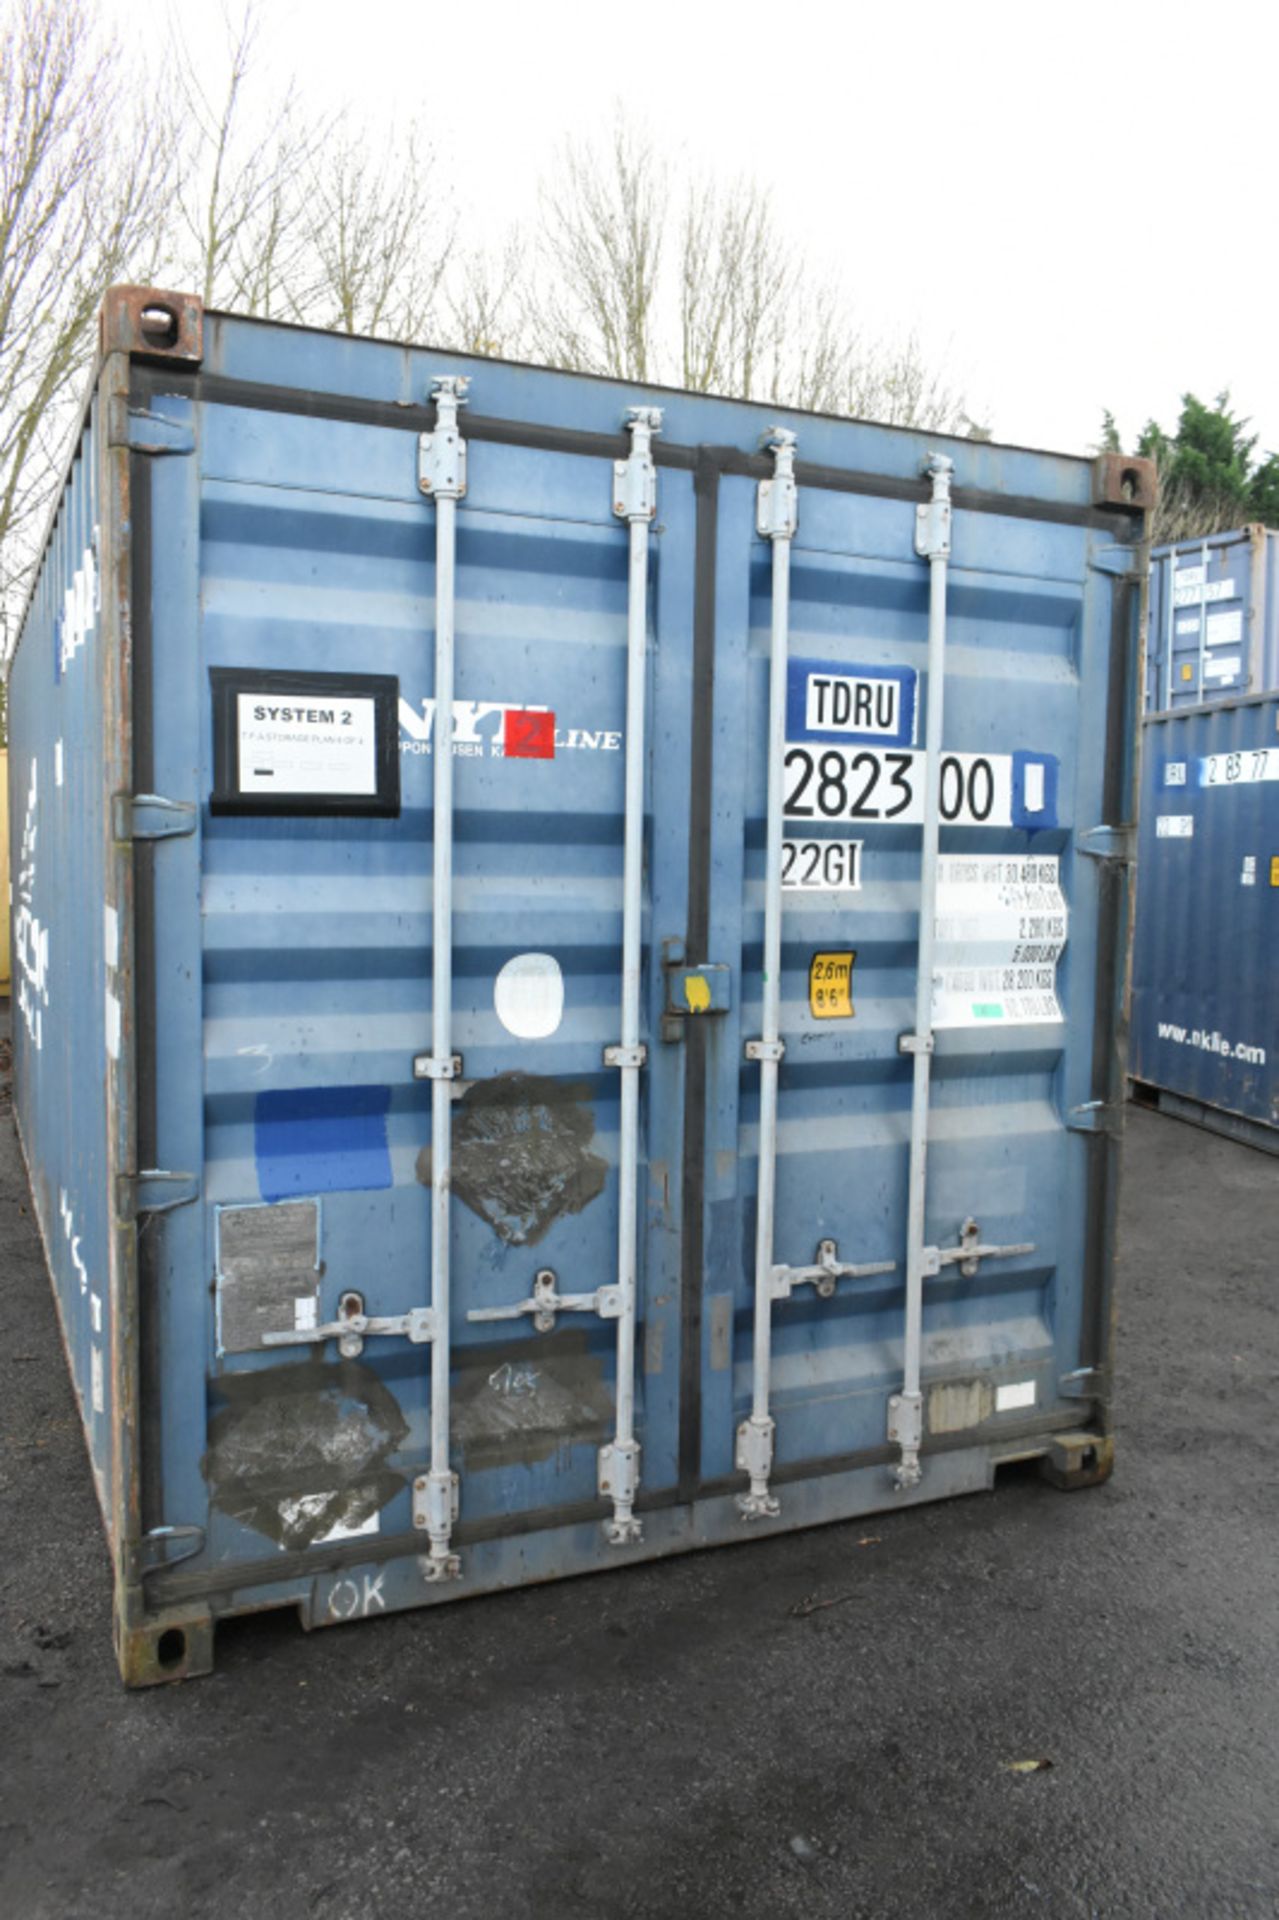 20ft ISO container - L 6.5M x W 2.44M x H 2.6M - Image 2 of 5